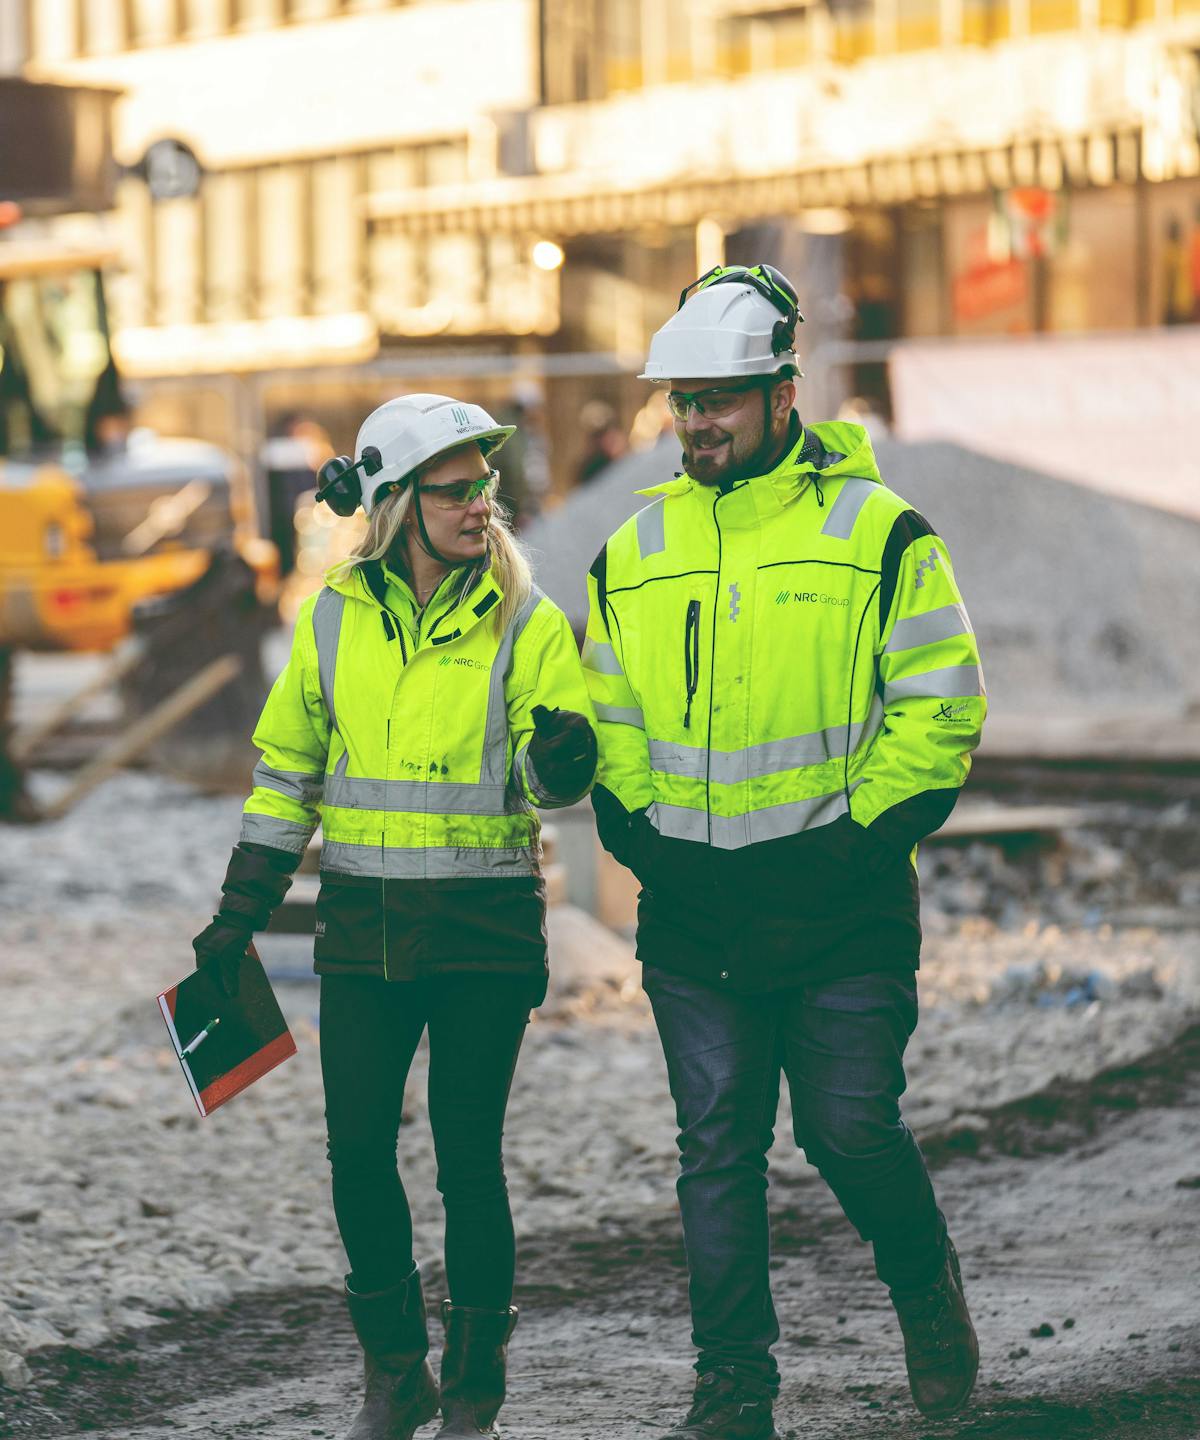 Two people walking and talking, wearing hardhats and safety glasses